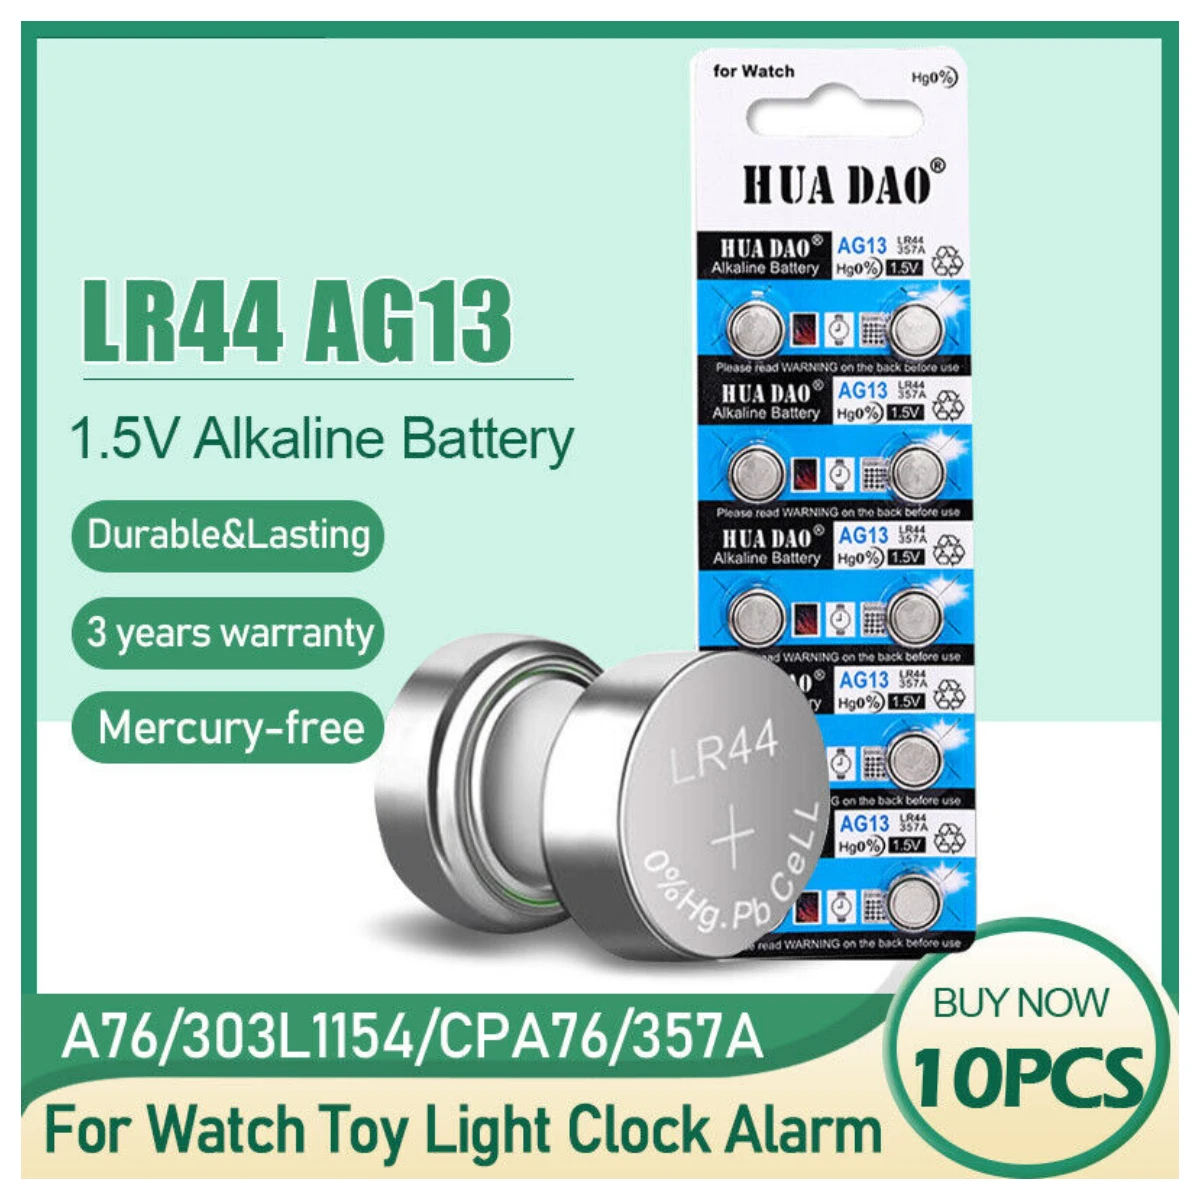 

10 PCS New LR44 AG13 L1154 1.5V Alkaline Button Cell Coin Pack Battery for toys，Watches，Glow-in-the-dark toy light